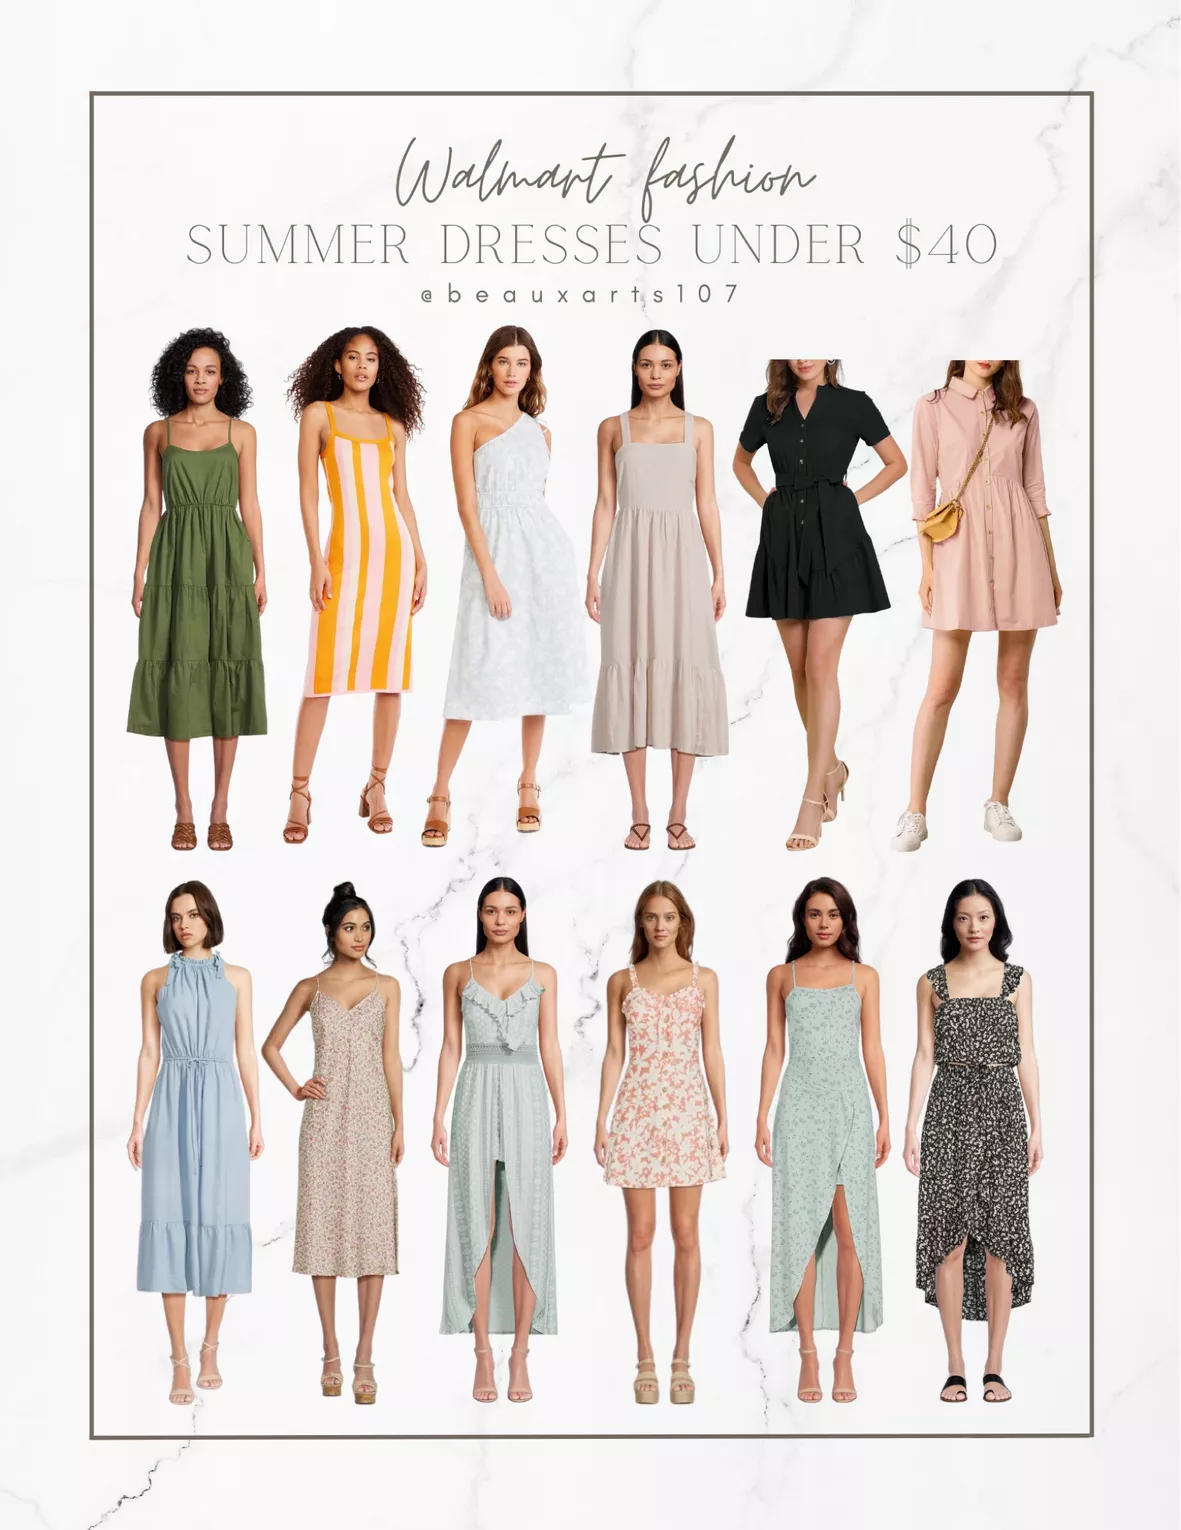 The Best Summer Clothes Under $40 at